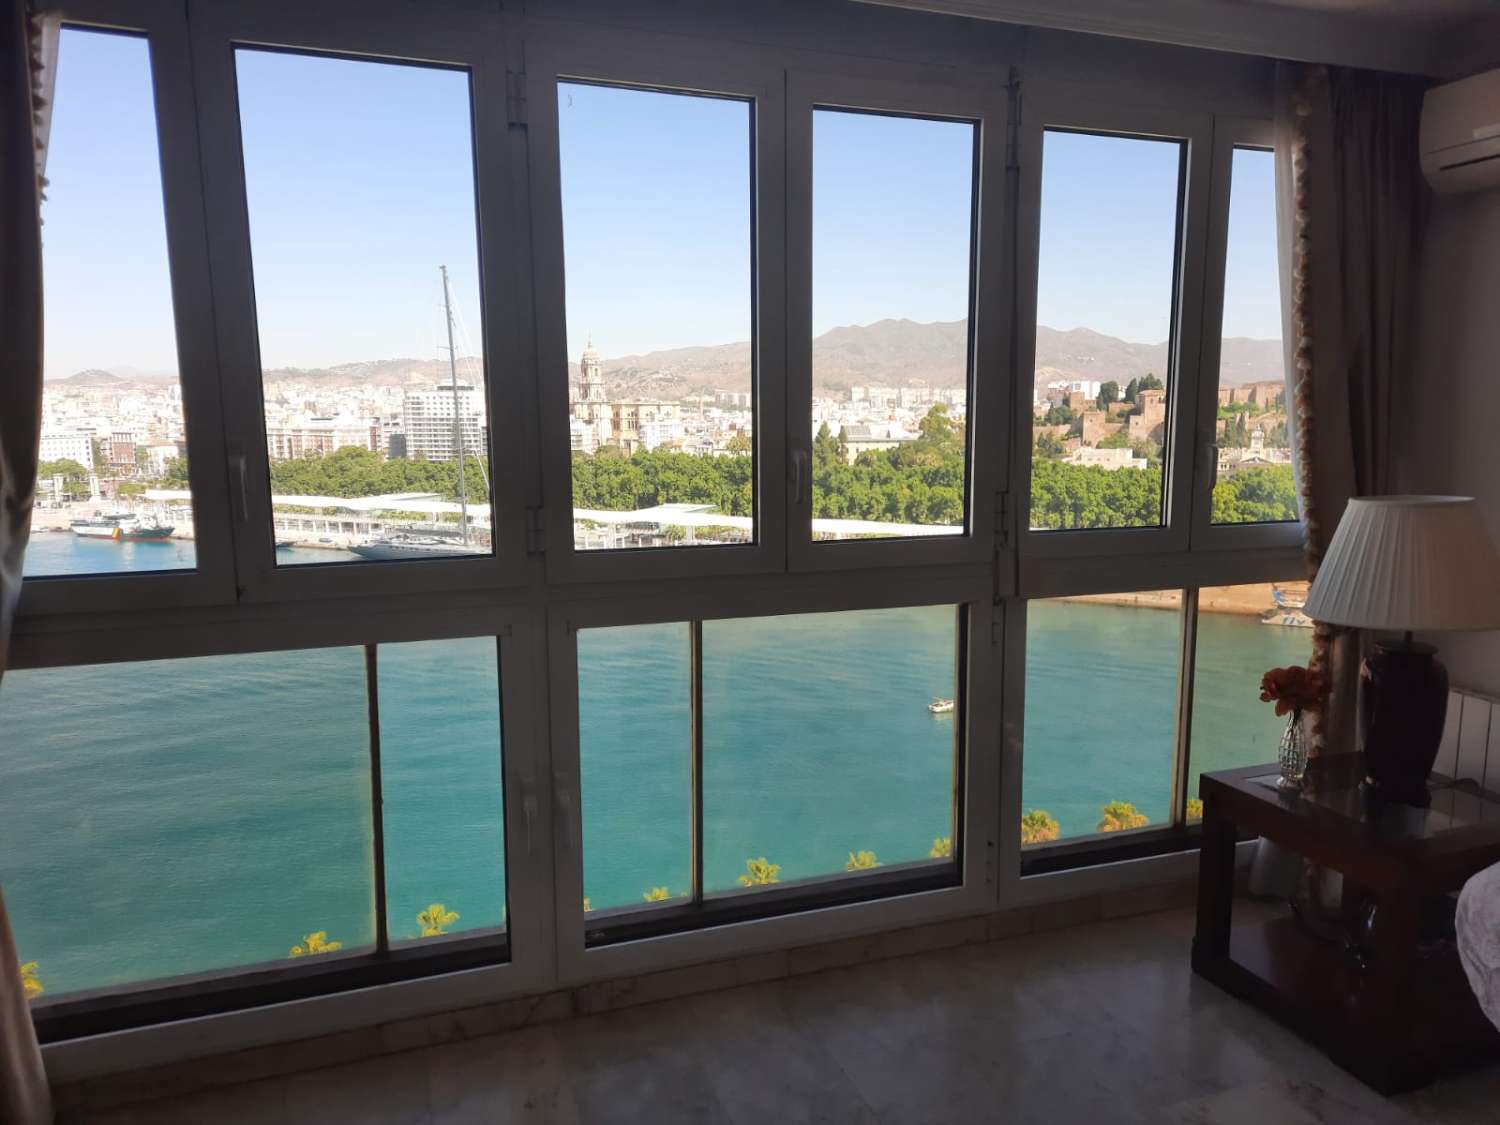 SOLD! APARTMENT IN MALAGUETA. SEA VIEWS - GARAGE AND STORAGE ROOM INCLUDED